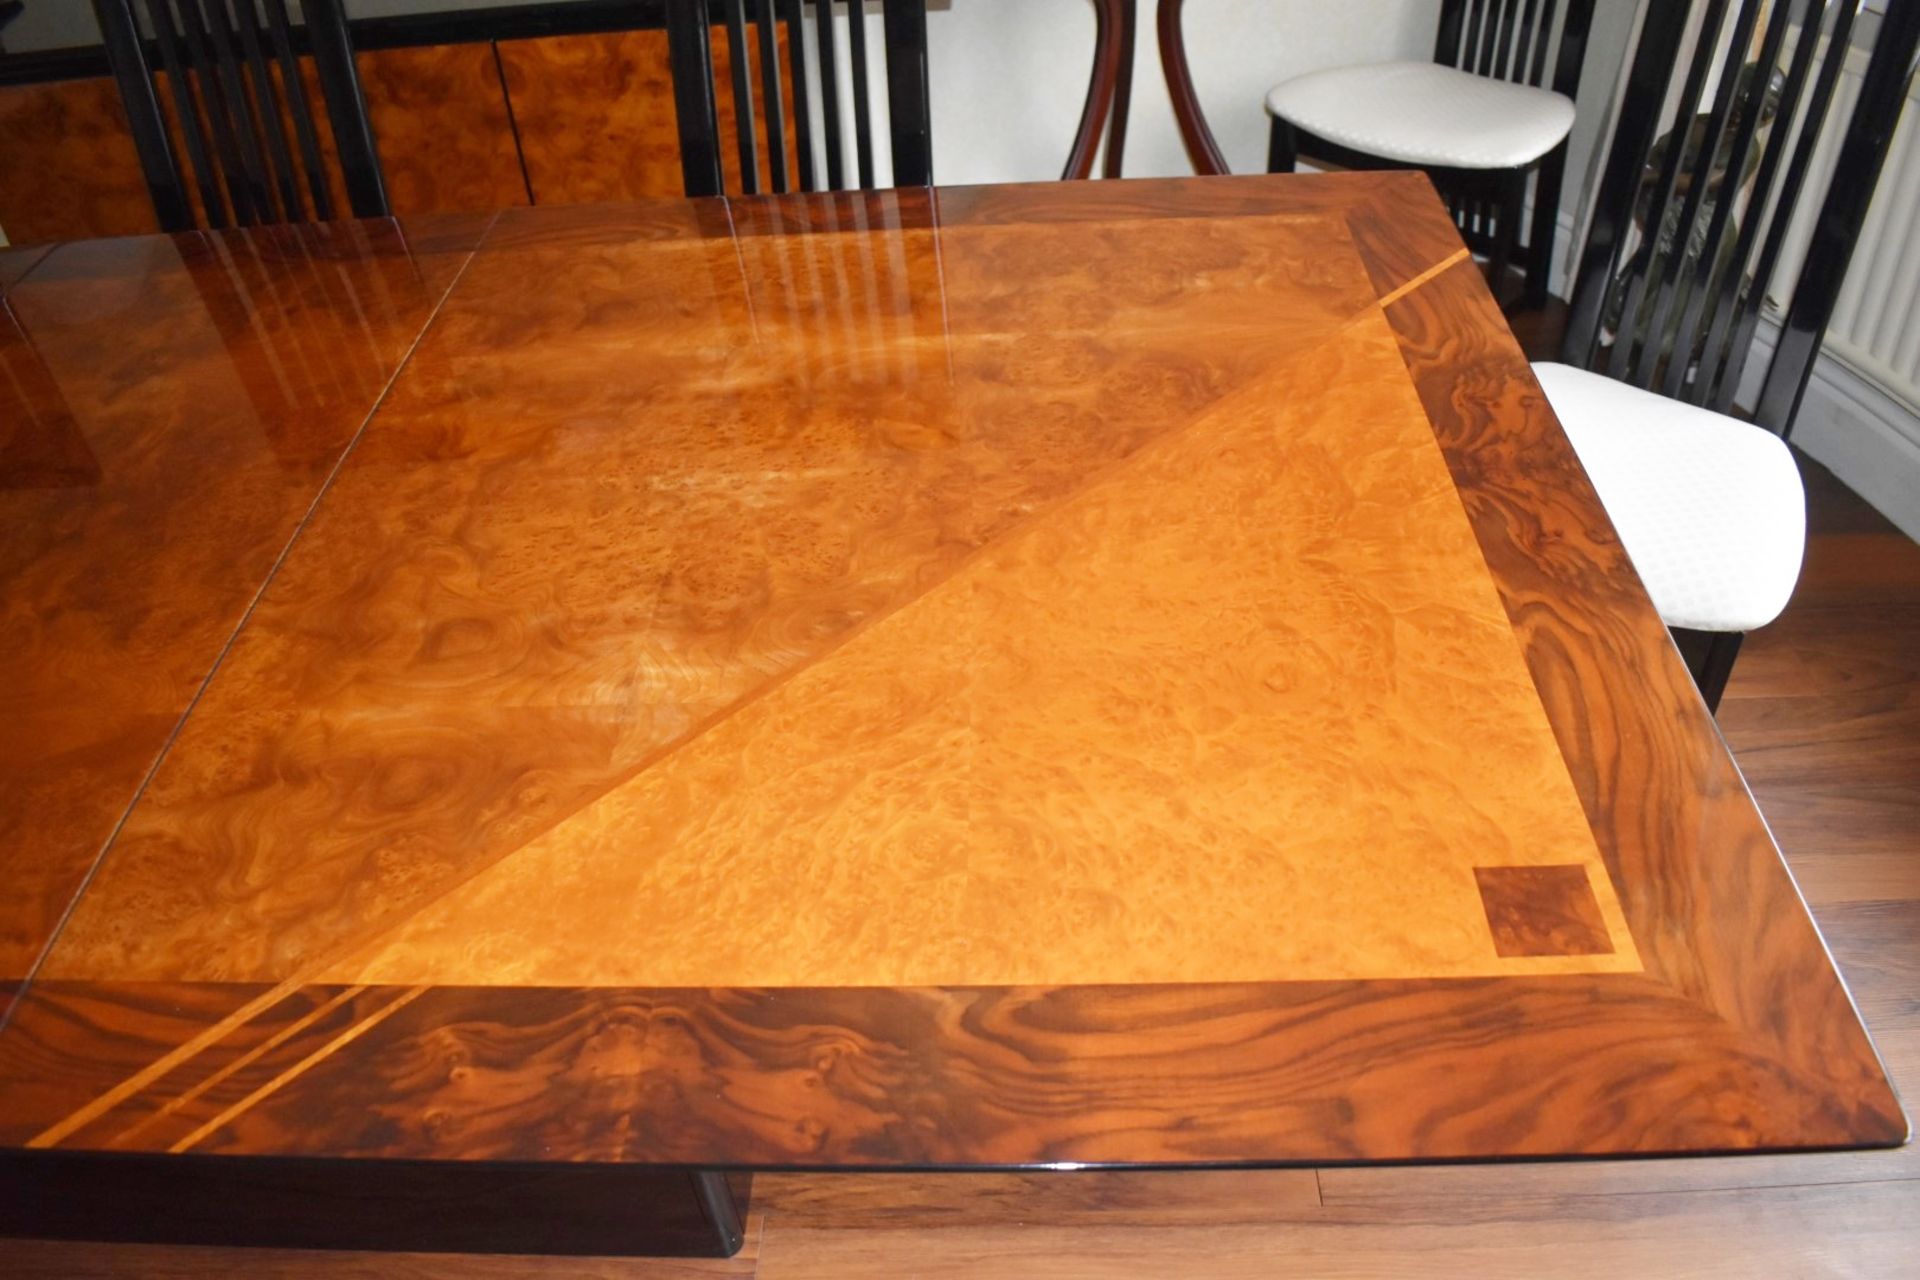 1 x Large Extending Dining Table With Eight Chairs - Features a Stunning Burr Walnut Centre With - Image 7 of 29